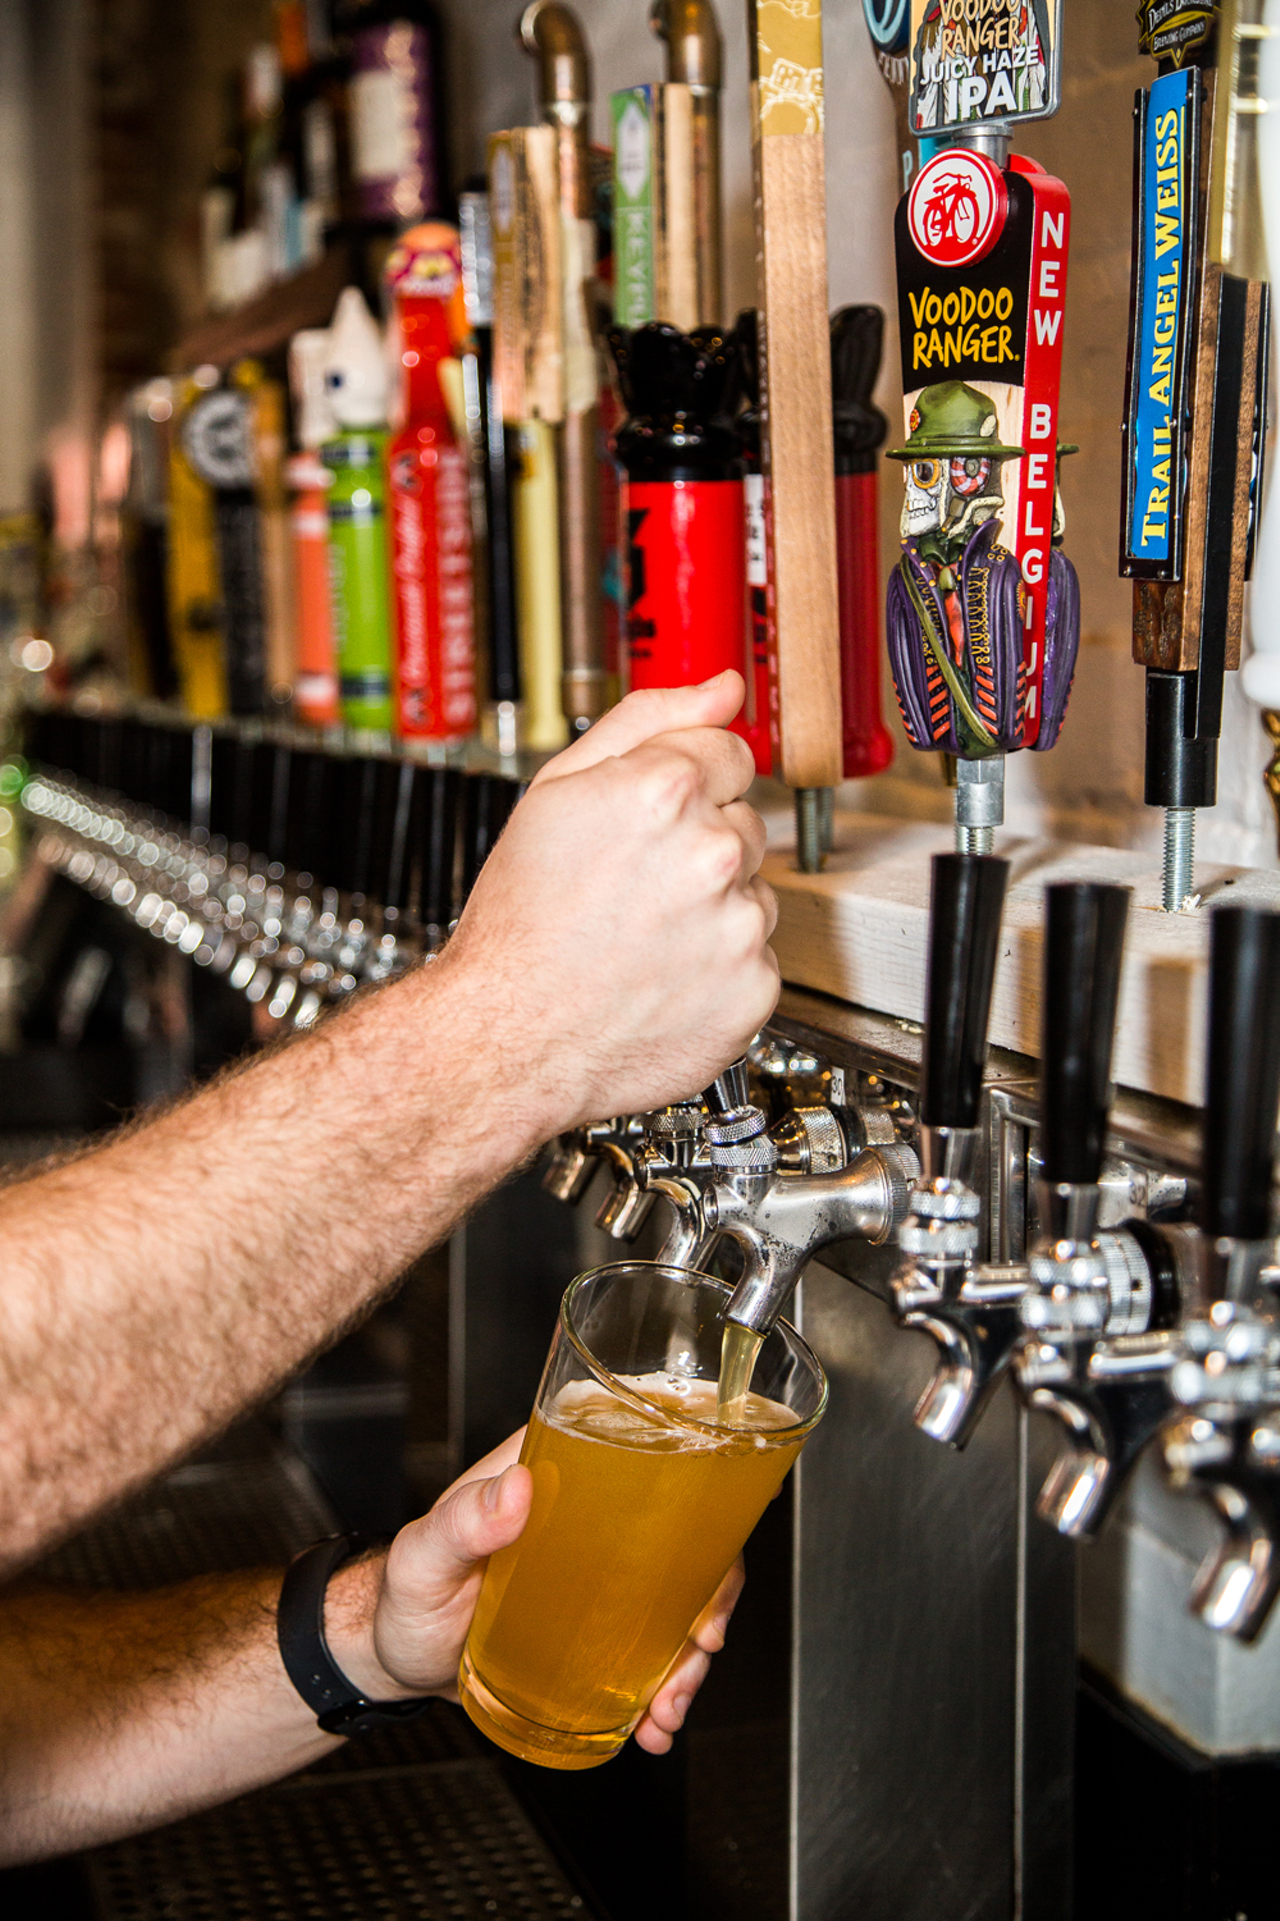 The bar has 40-something beers on tap.